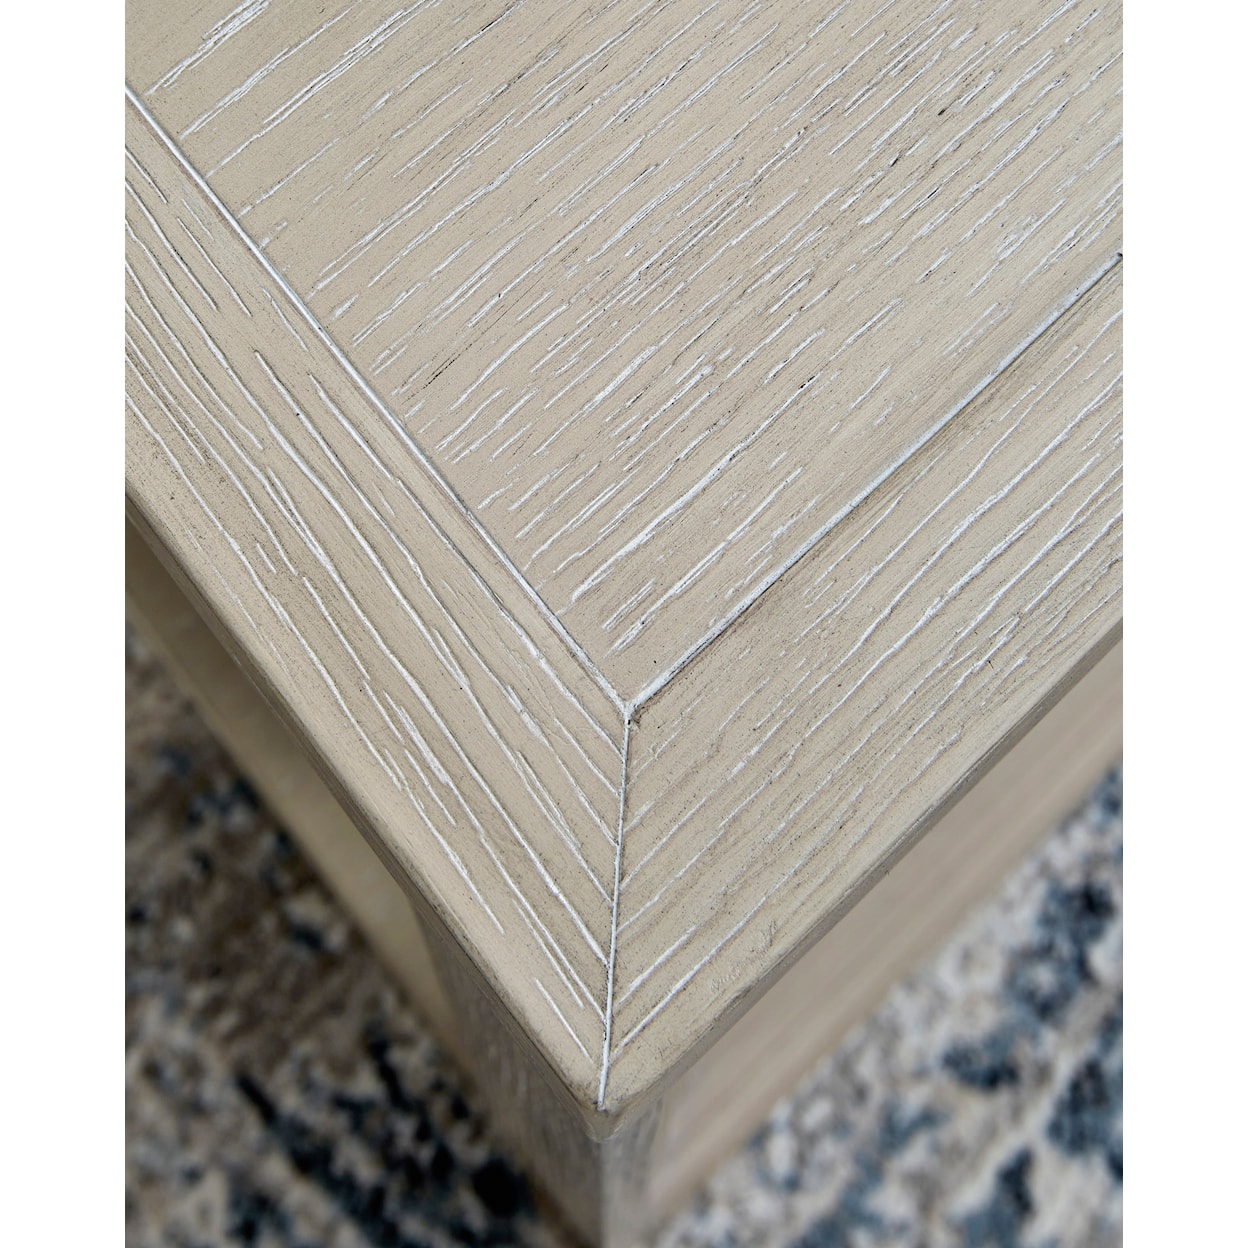 Signature Design by Ashley Marxhart Square End Table